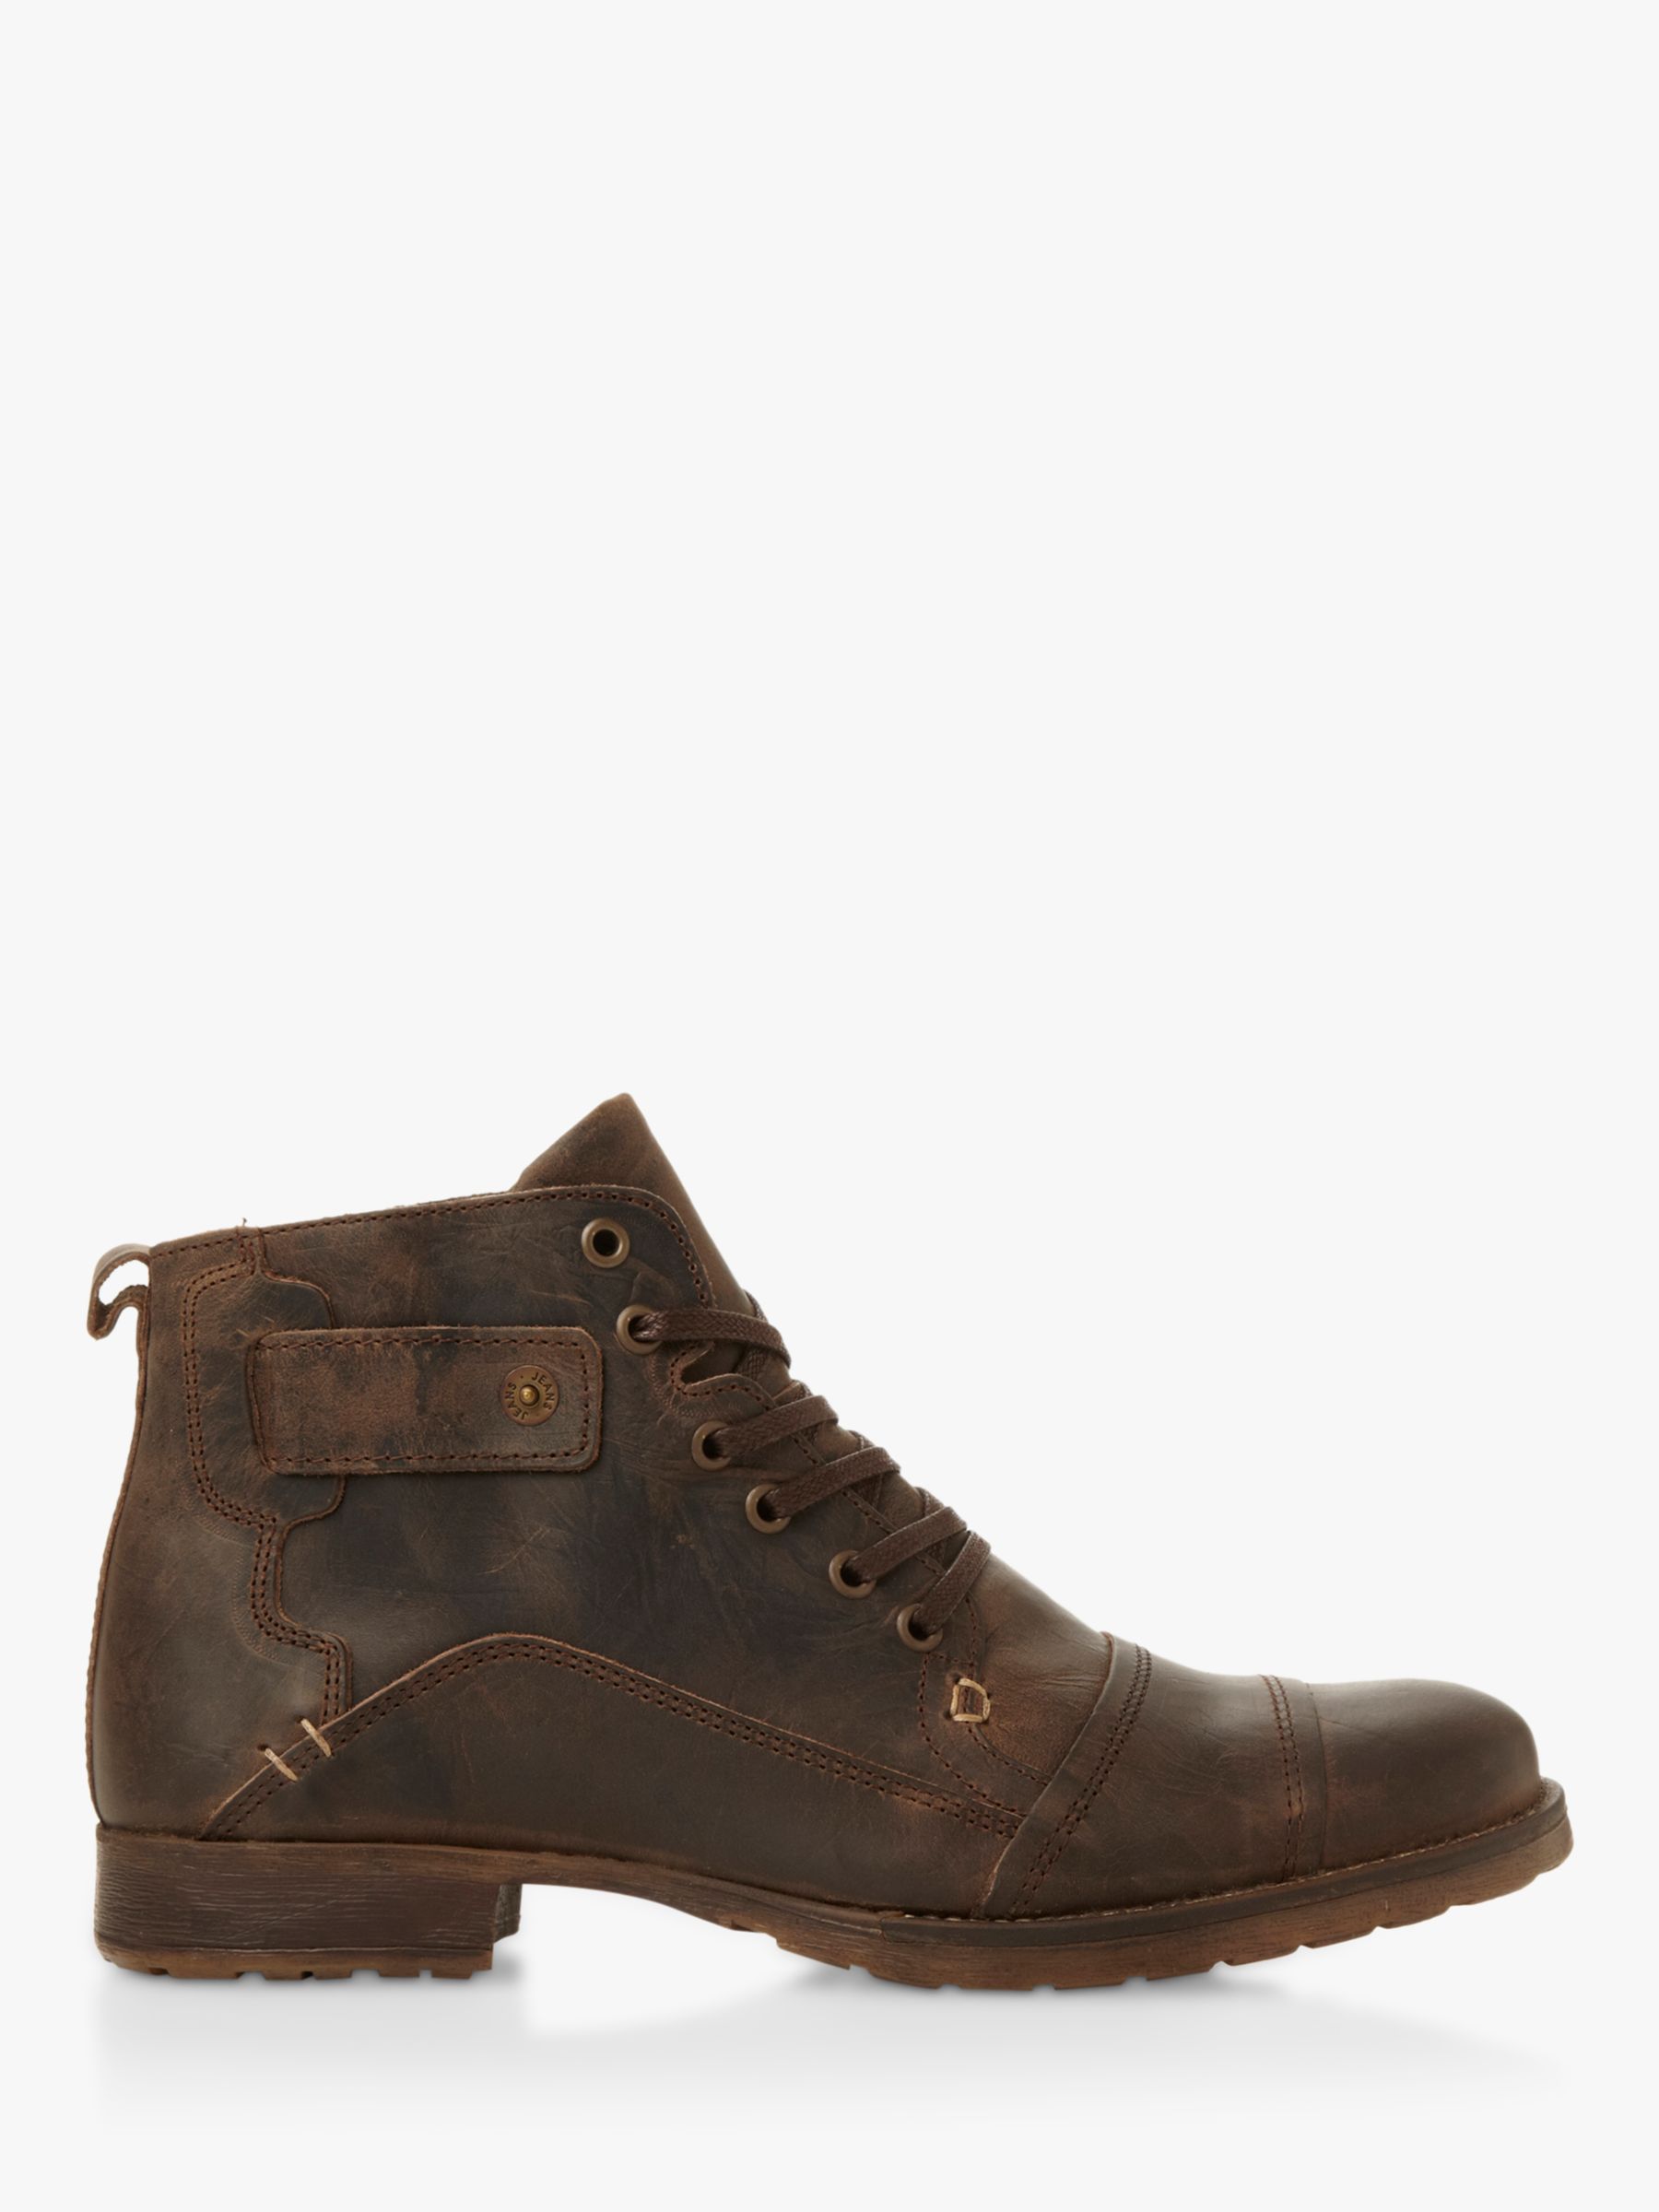 Buy Dune Simon Leather Boots Online at johnlewis.com